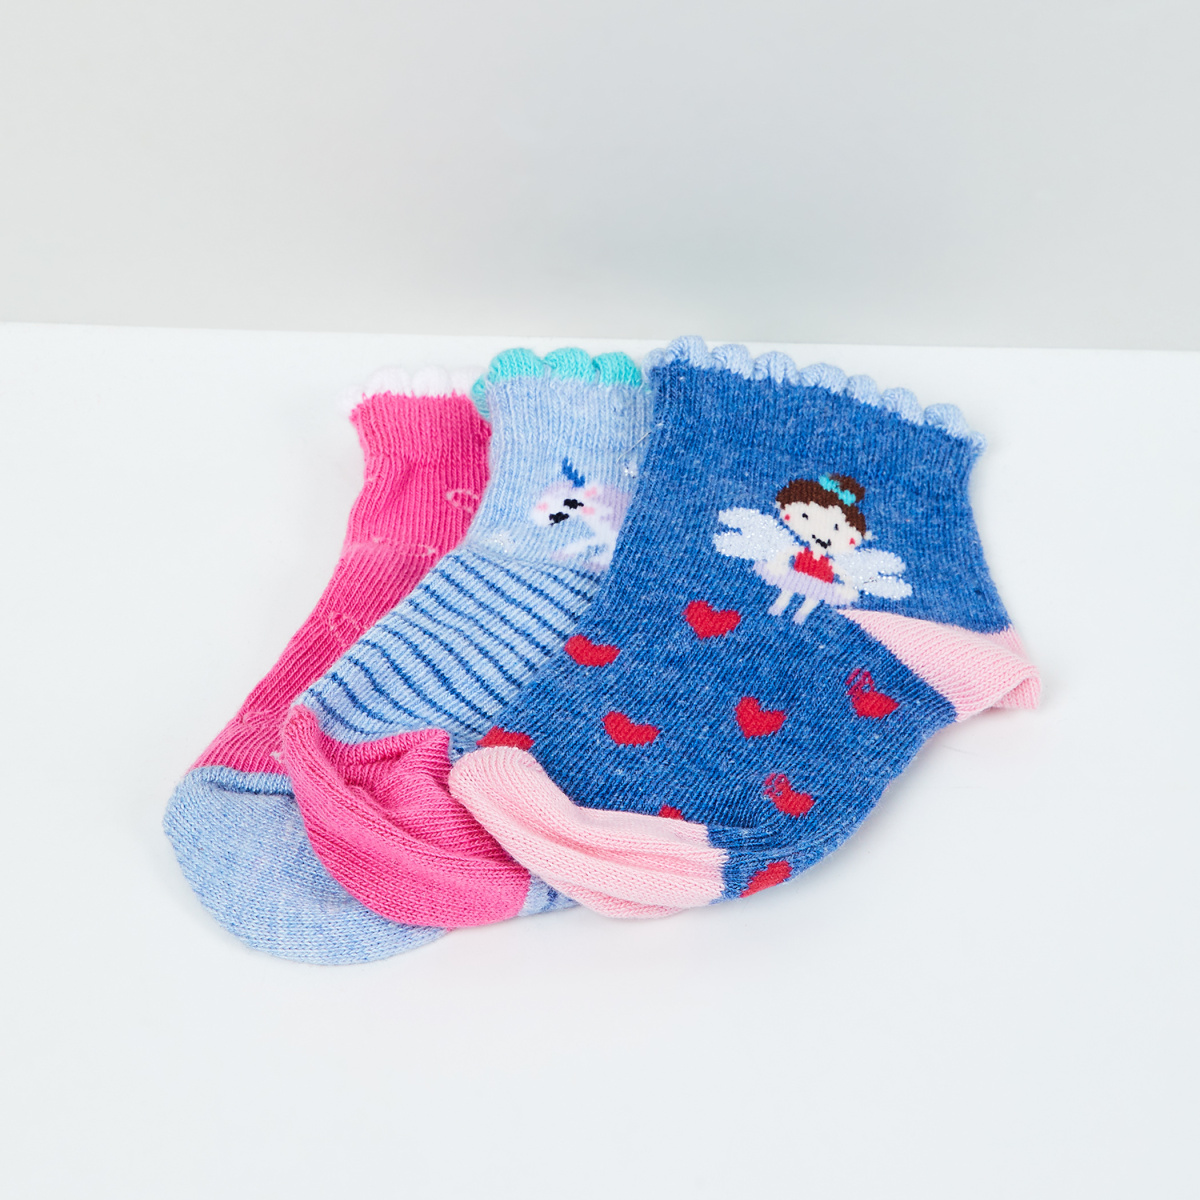 MAX Woven Design Socks - Pack of 3- 1-2 Y